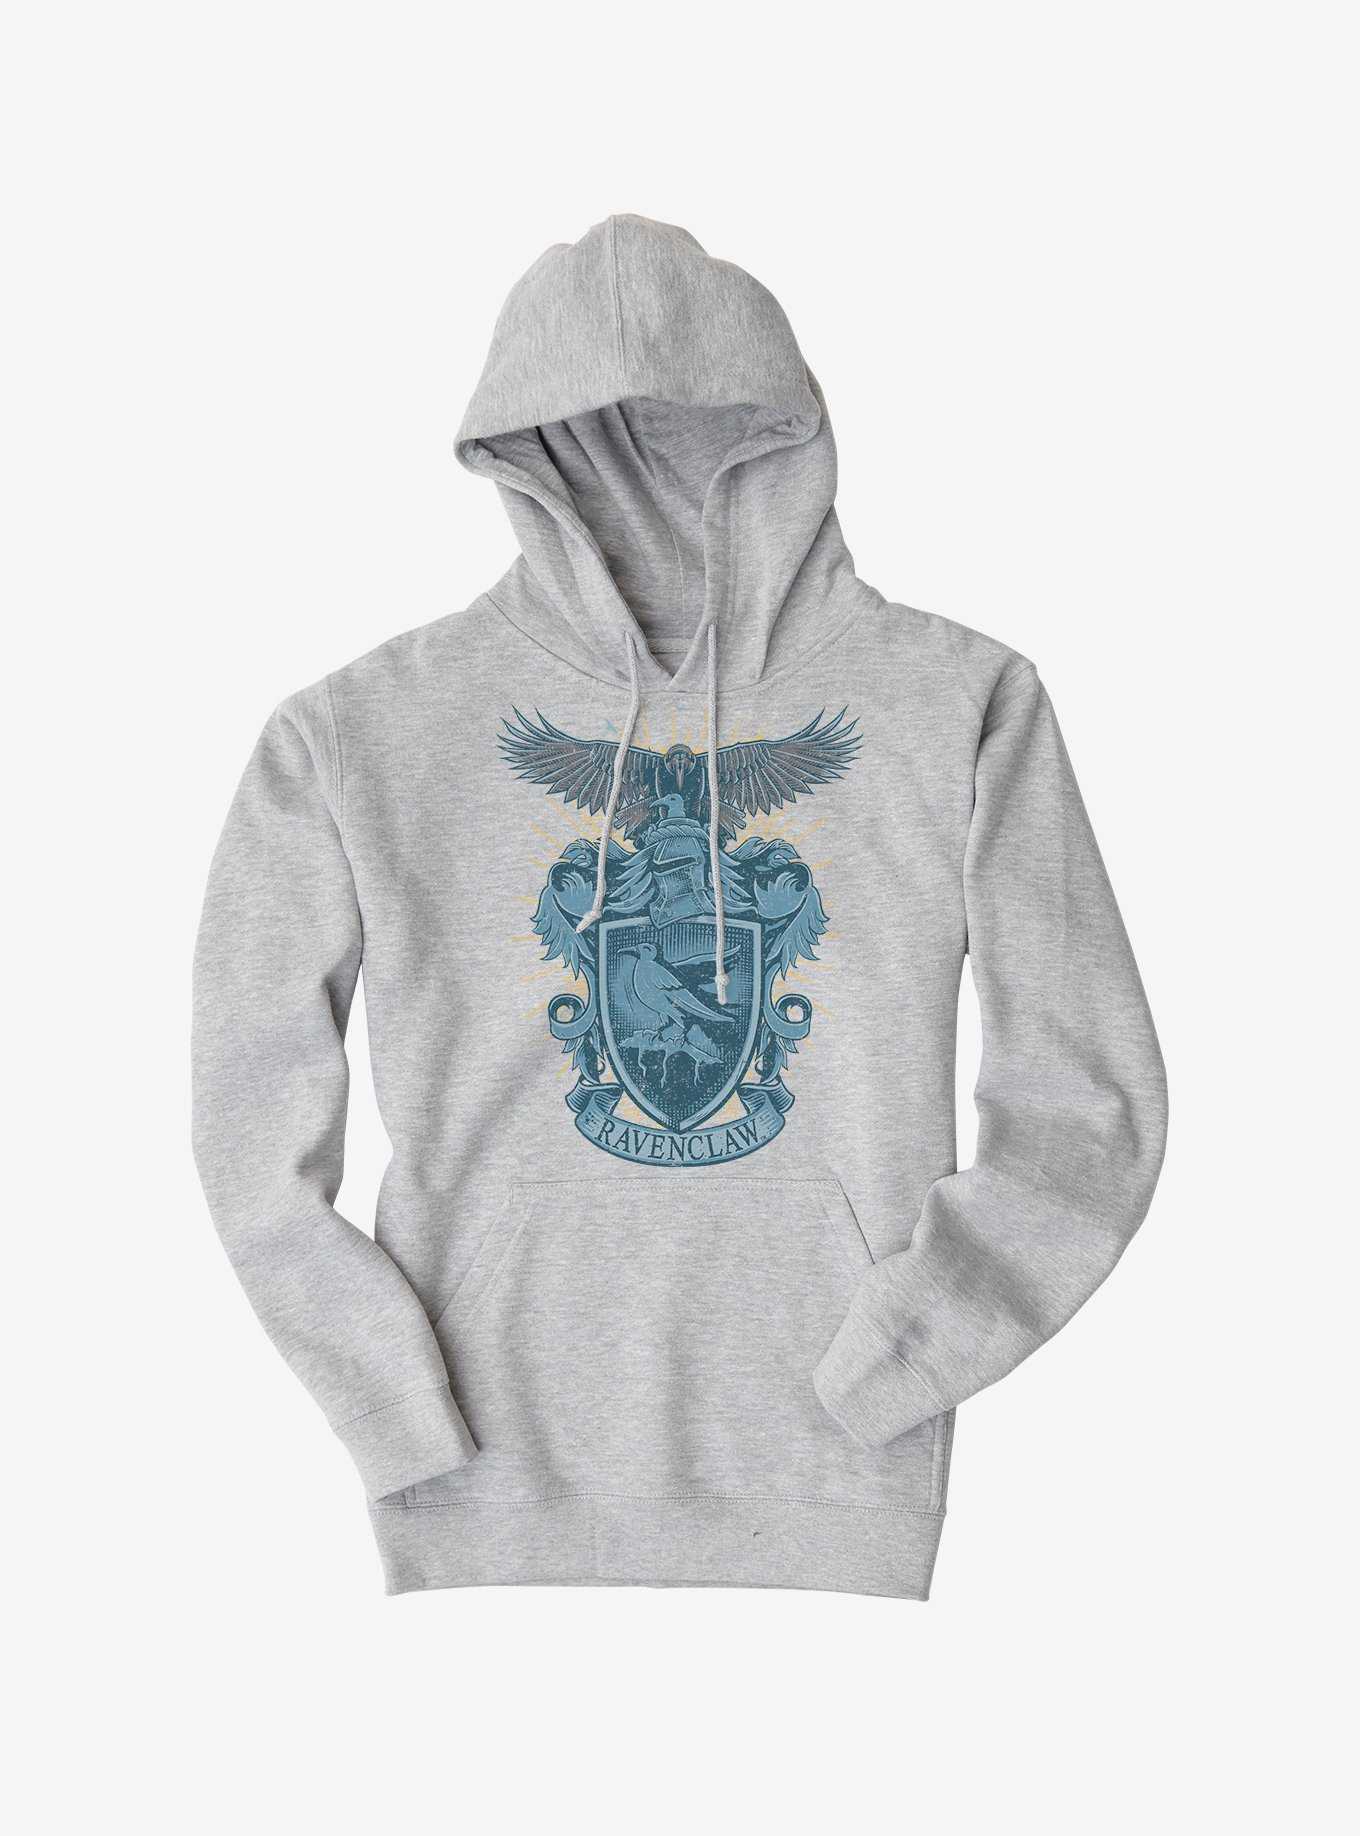 OFFICIAL Ravenclaw Hoodies & Sweaters | Topic Hot